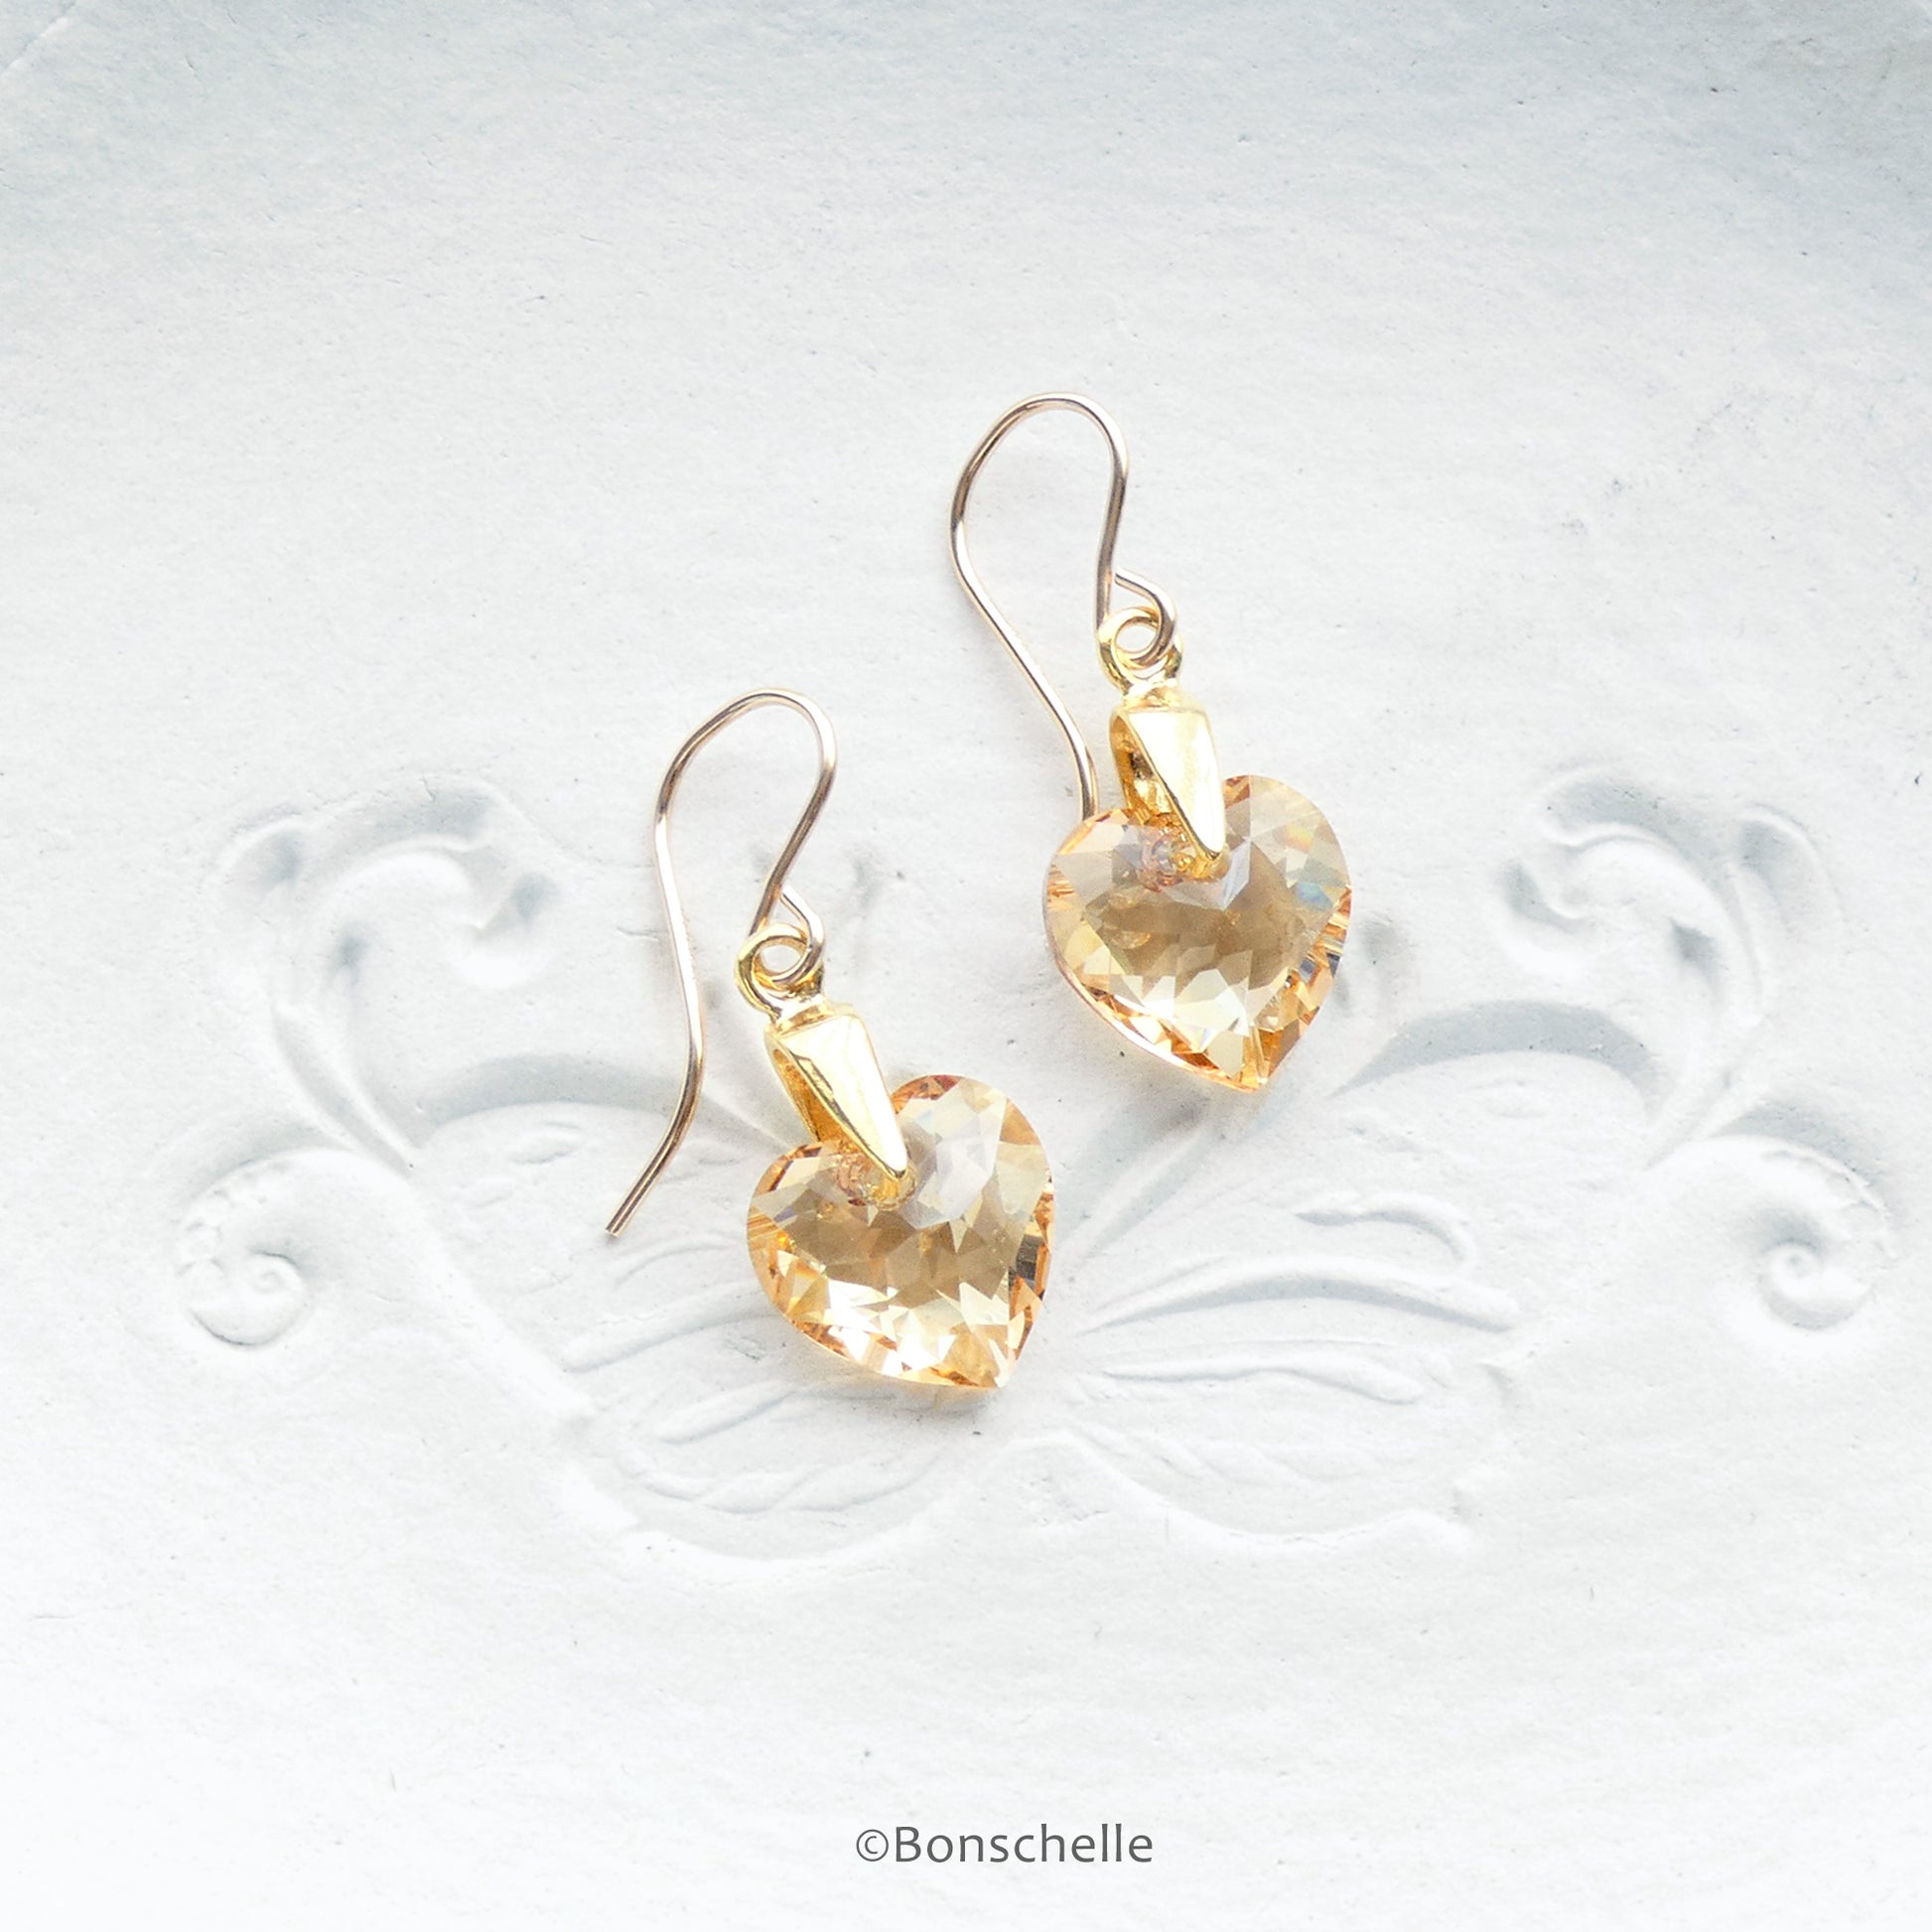 Handmade earrings with pale golden bronze toned Swarovski crystal heart earrings and 14K gold filled earwires 